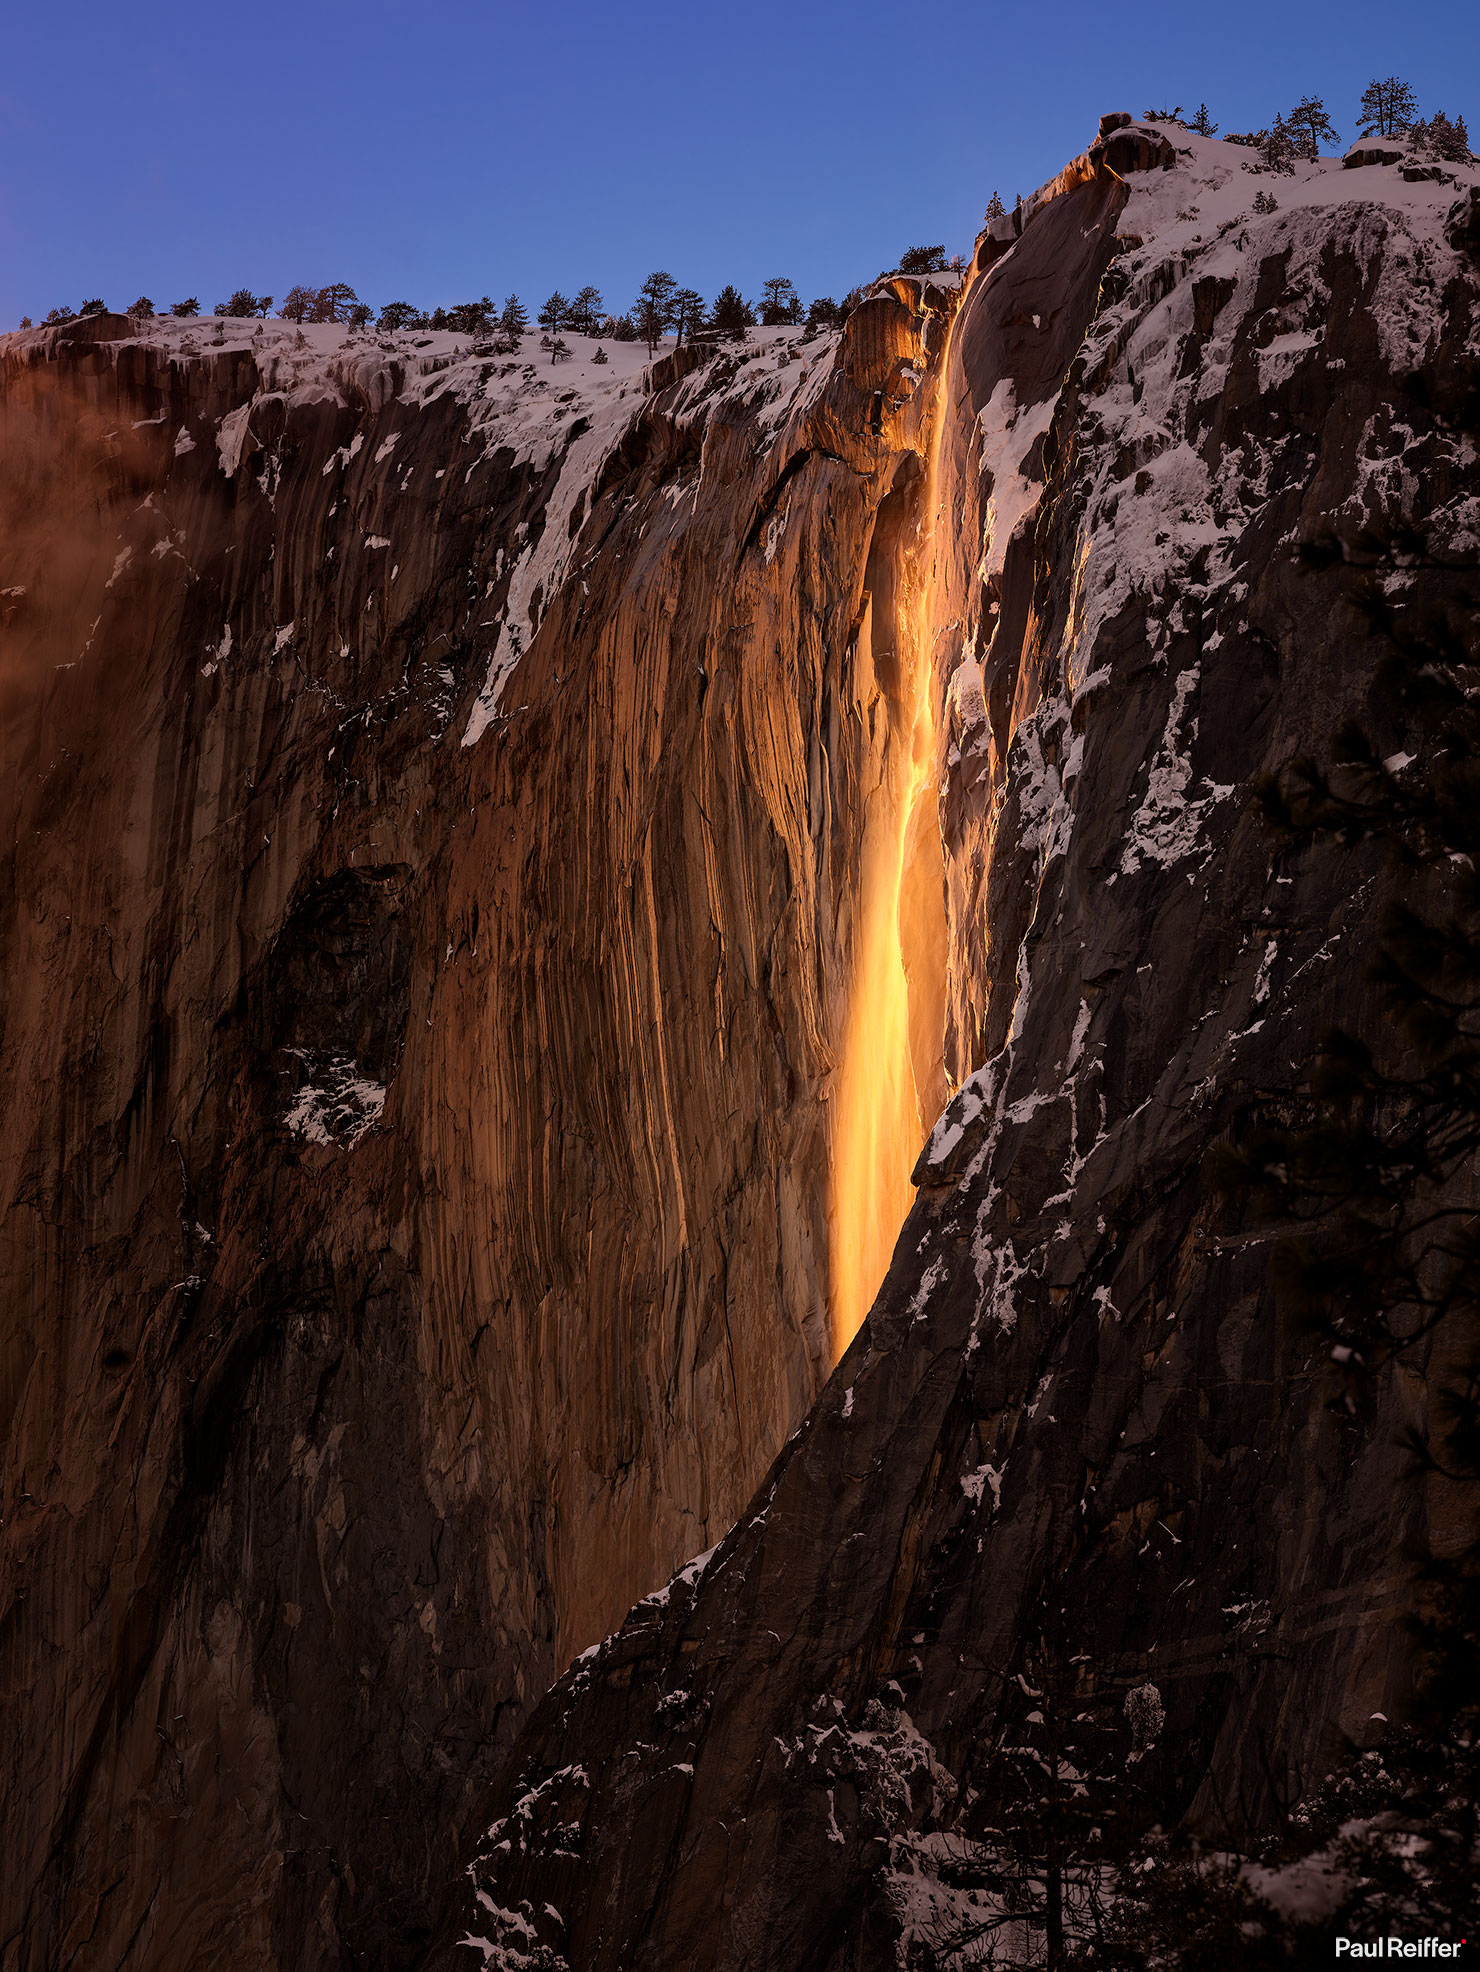 Yosemite Firefall Horsetail Falls Sunset Reflection Paul Reiffer Phase One Medium Format IQ4 150MP 151 XF Camera Professional Landscape Photographer Guide How To Day 2 240mm